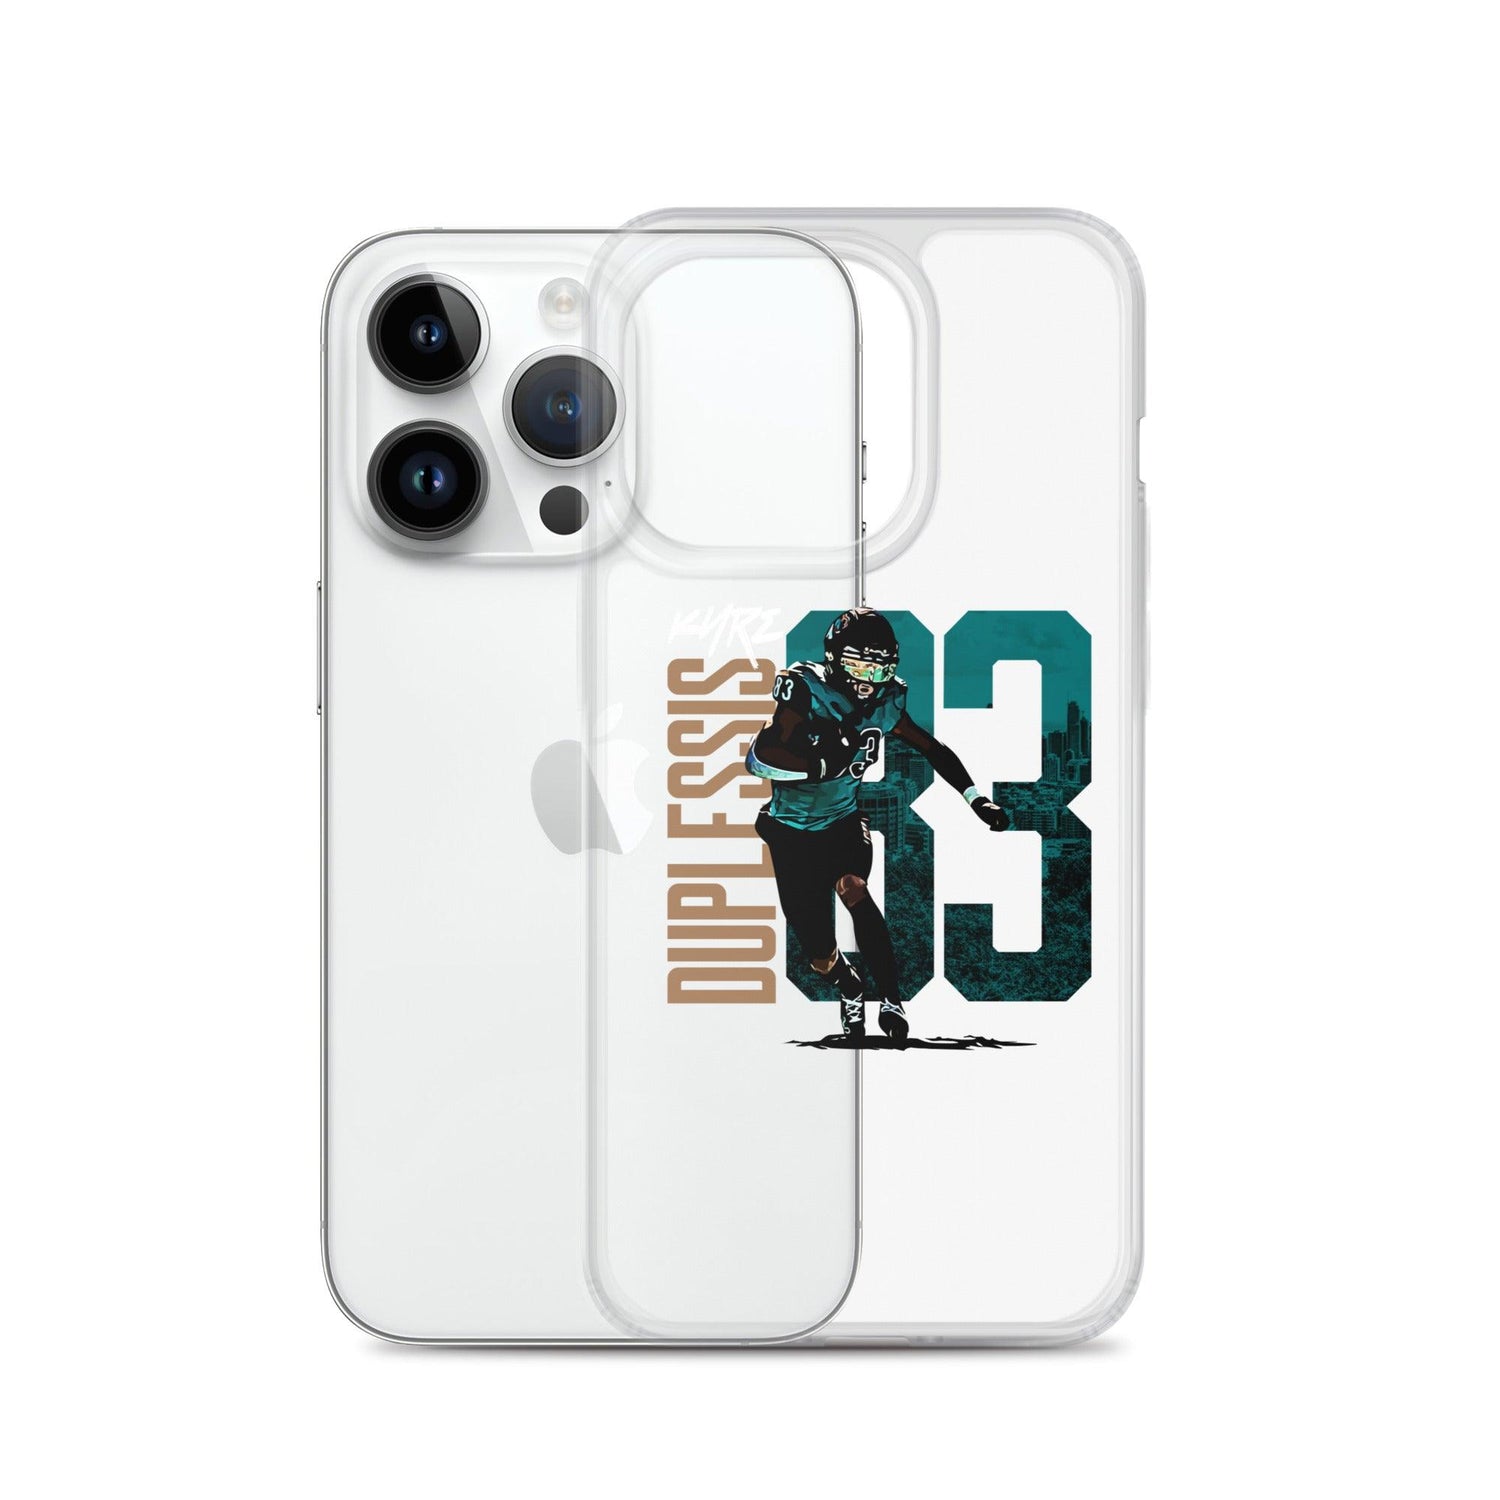 Kyre Duplessis "Gameday" iPhone Case - Fan Arch